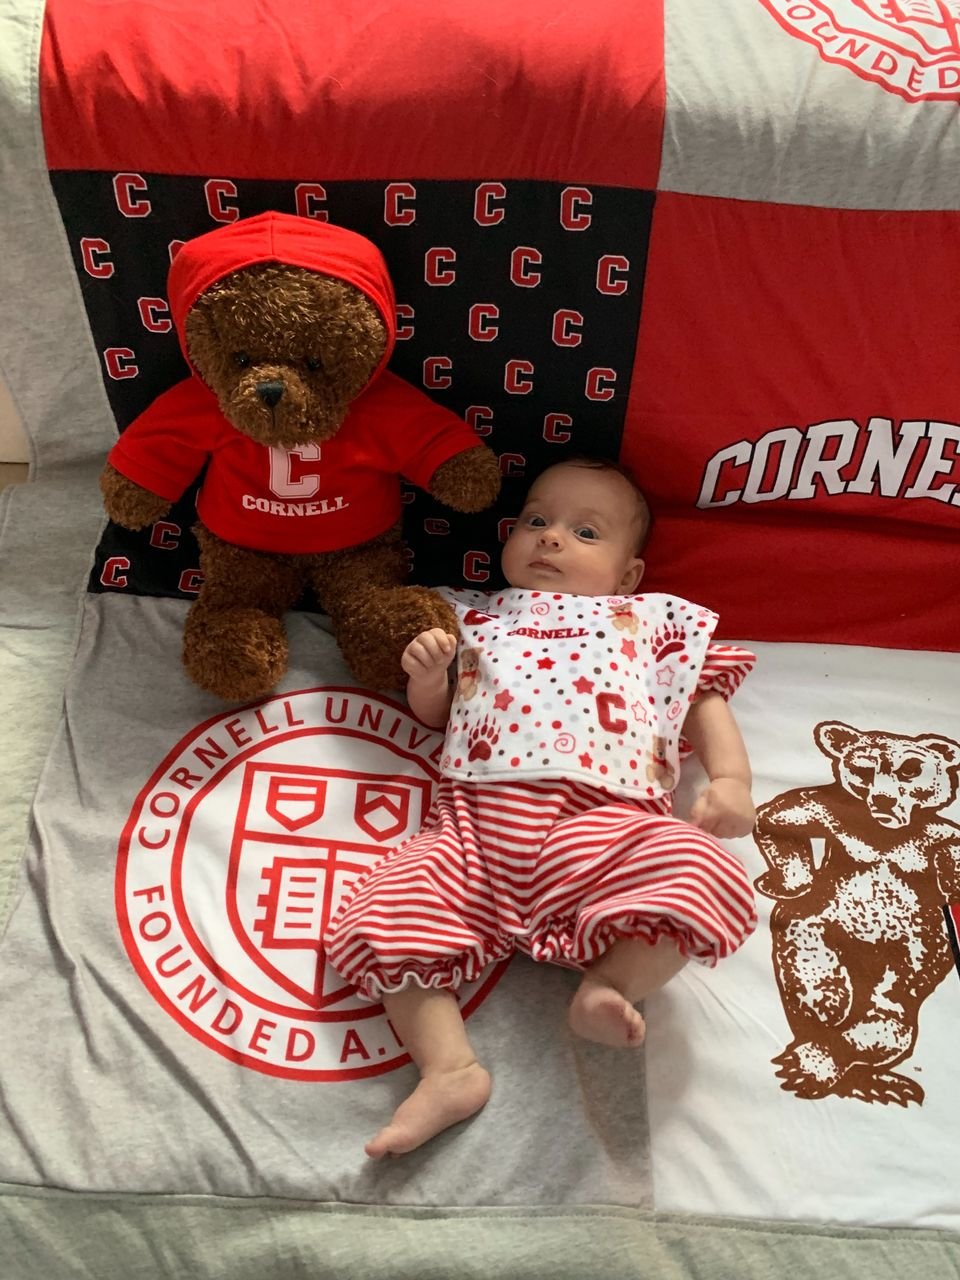 An infant lies on a Cornell blanket, surrounded by CU swag.